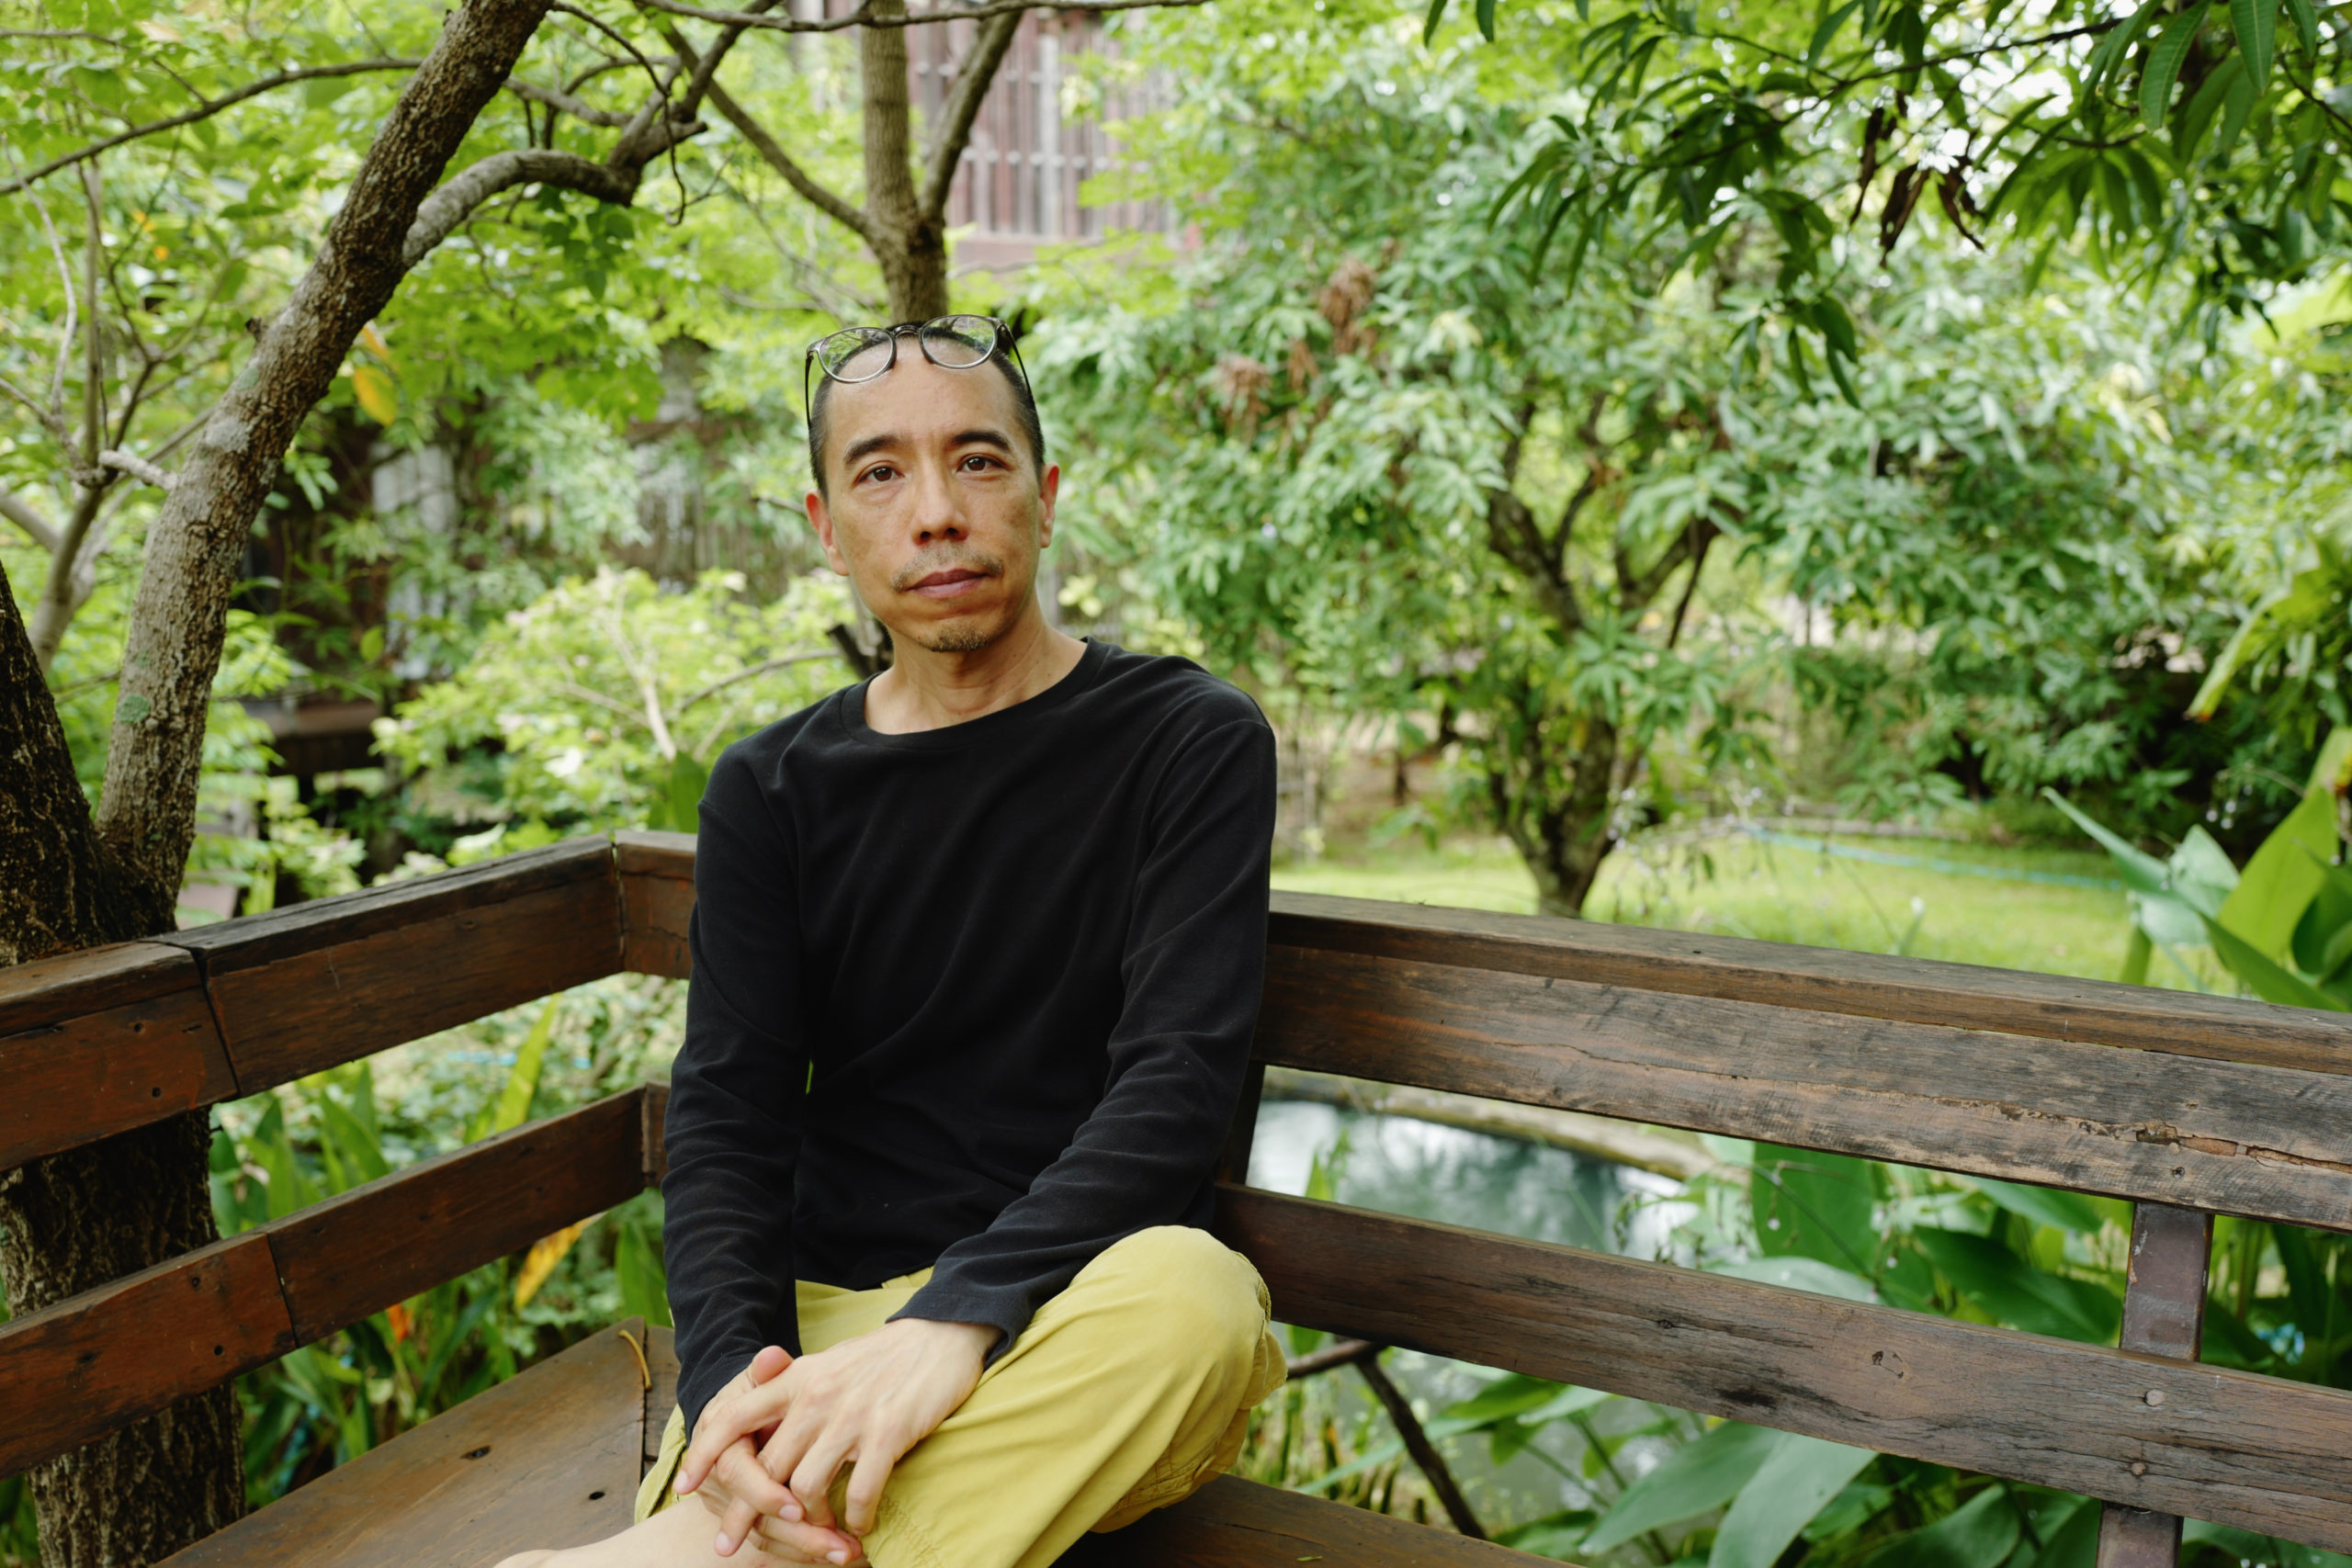 This is a portrait of director Apichatpong Weerasethakul